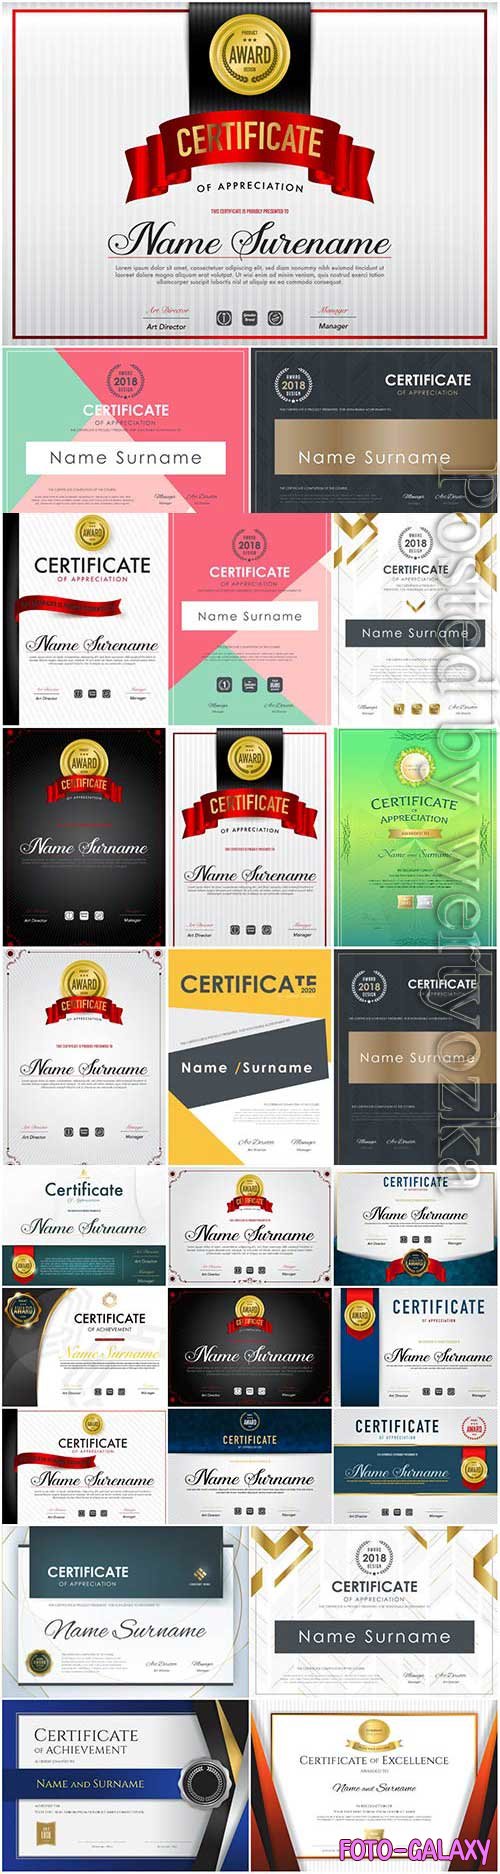 Certificates and diplomas with various designs in vector